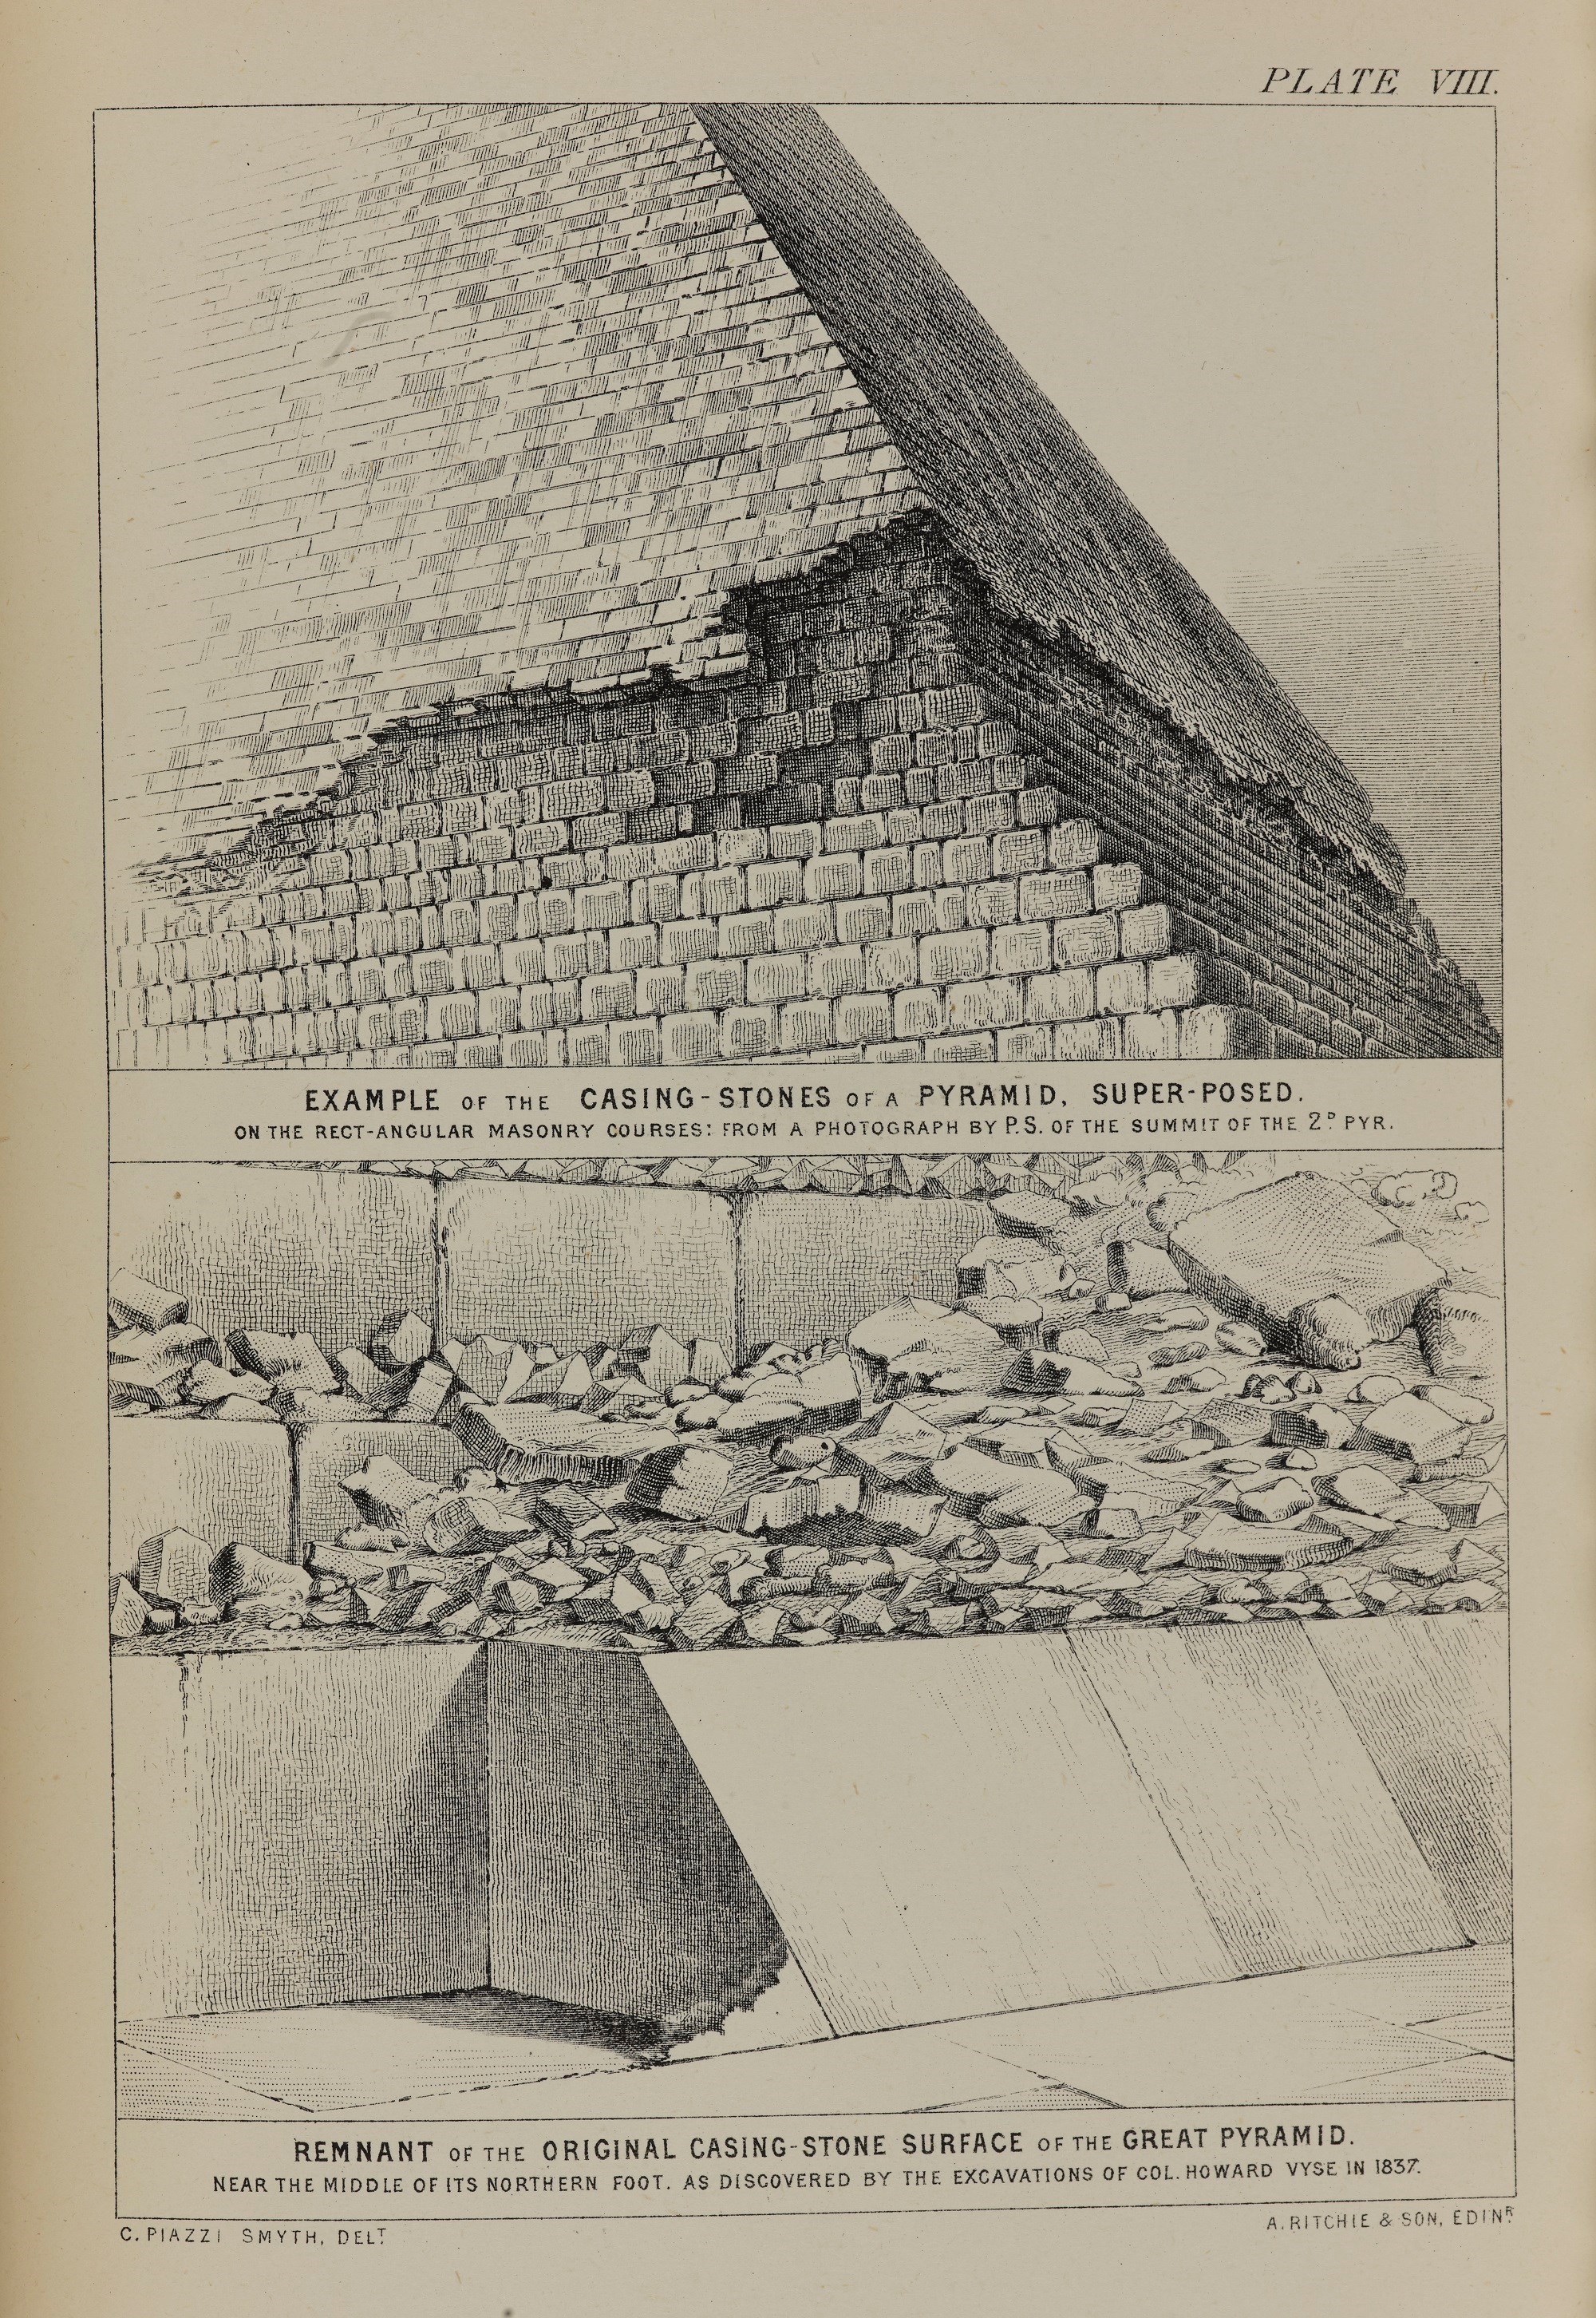 Plate from Charles Piazzi Smyth’s publication Our Inheritance in the Great Pyramid showing some of casing stones still in situ at the base.